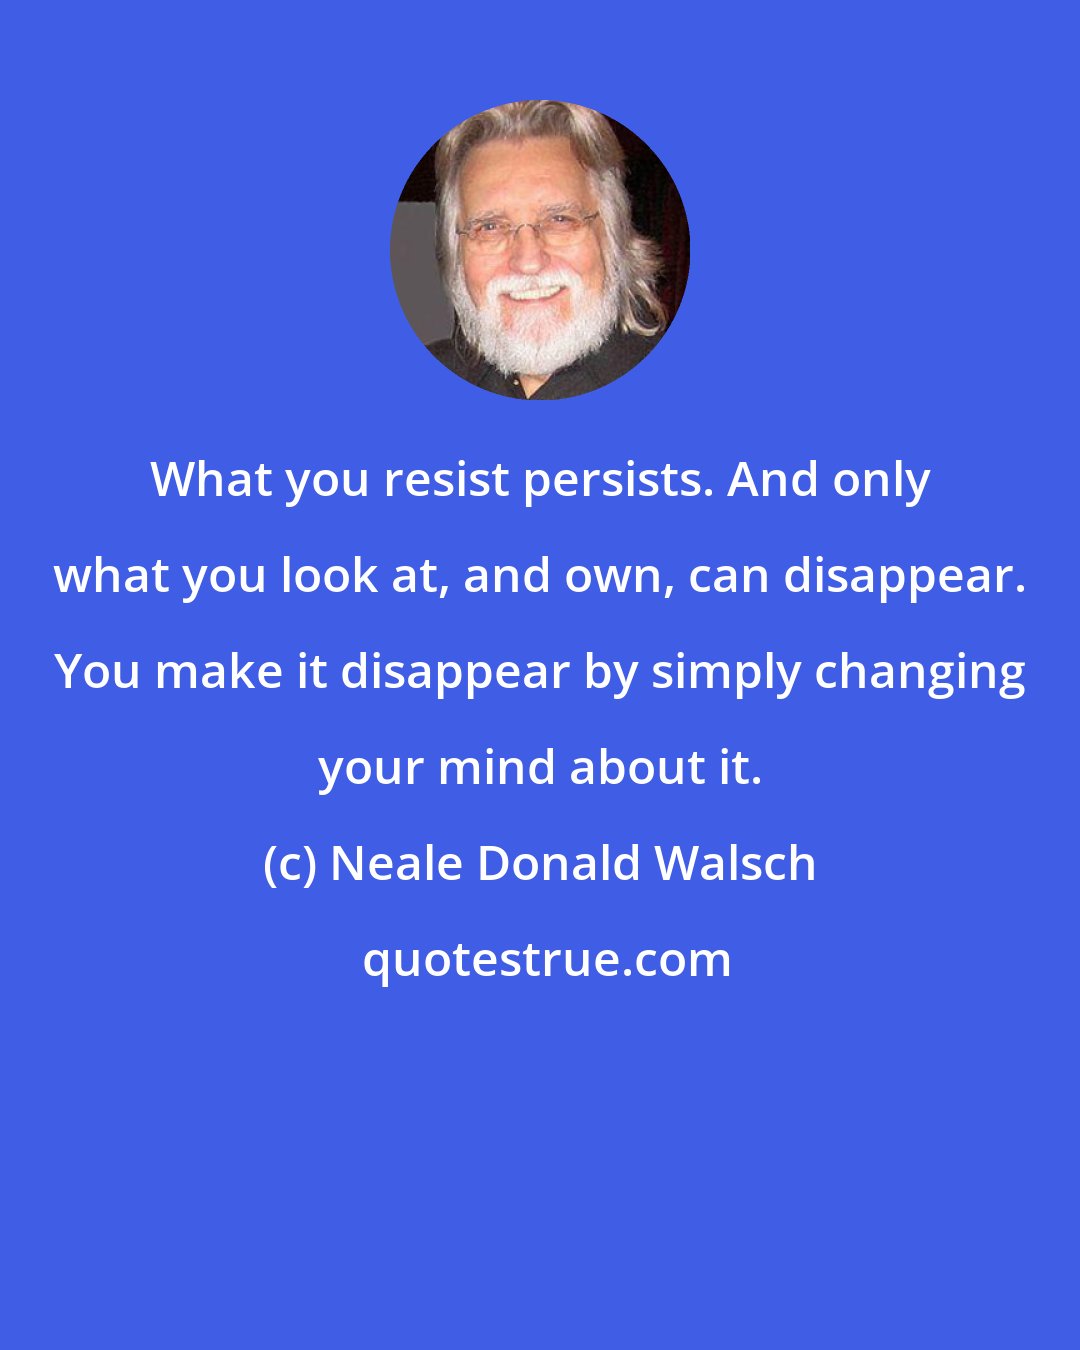 Neale Donald Walsch: What you resist persists. And only what you look at, and own, can disappear. You make it disappear by simply changing your mind about it.